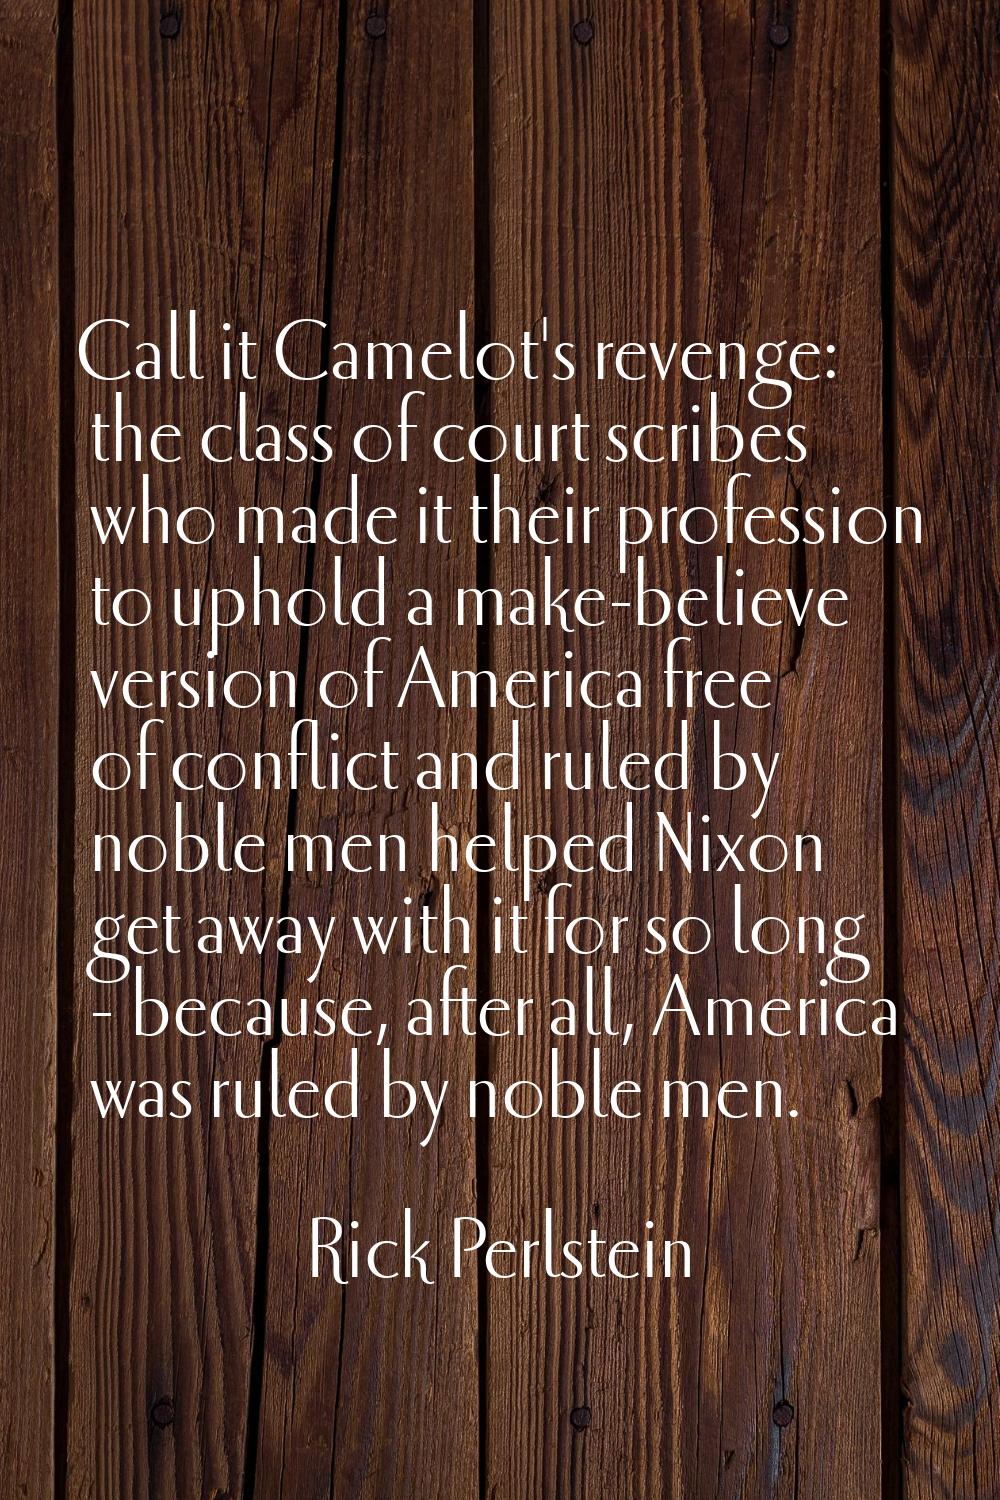 Call it Camelot's revenge: the class of court scribes who made it their profession to uphold a make